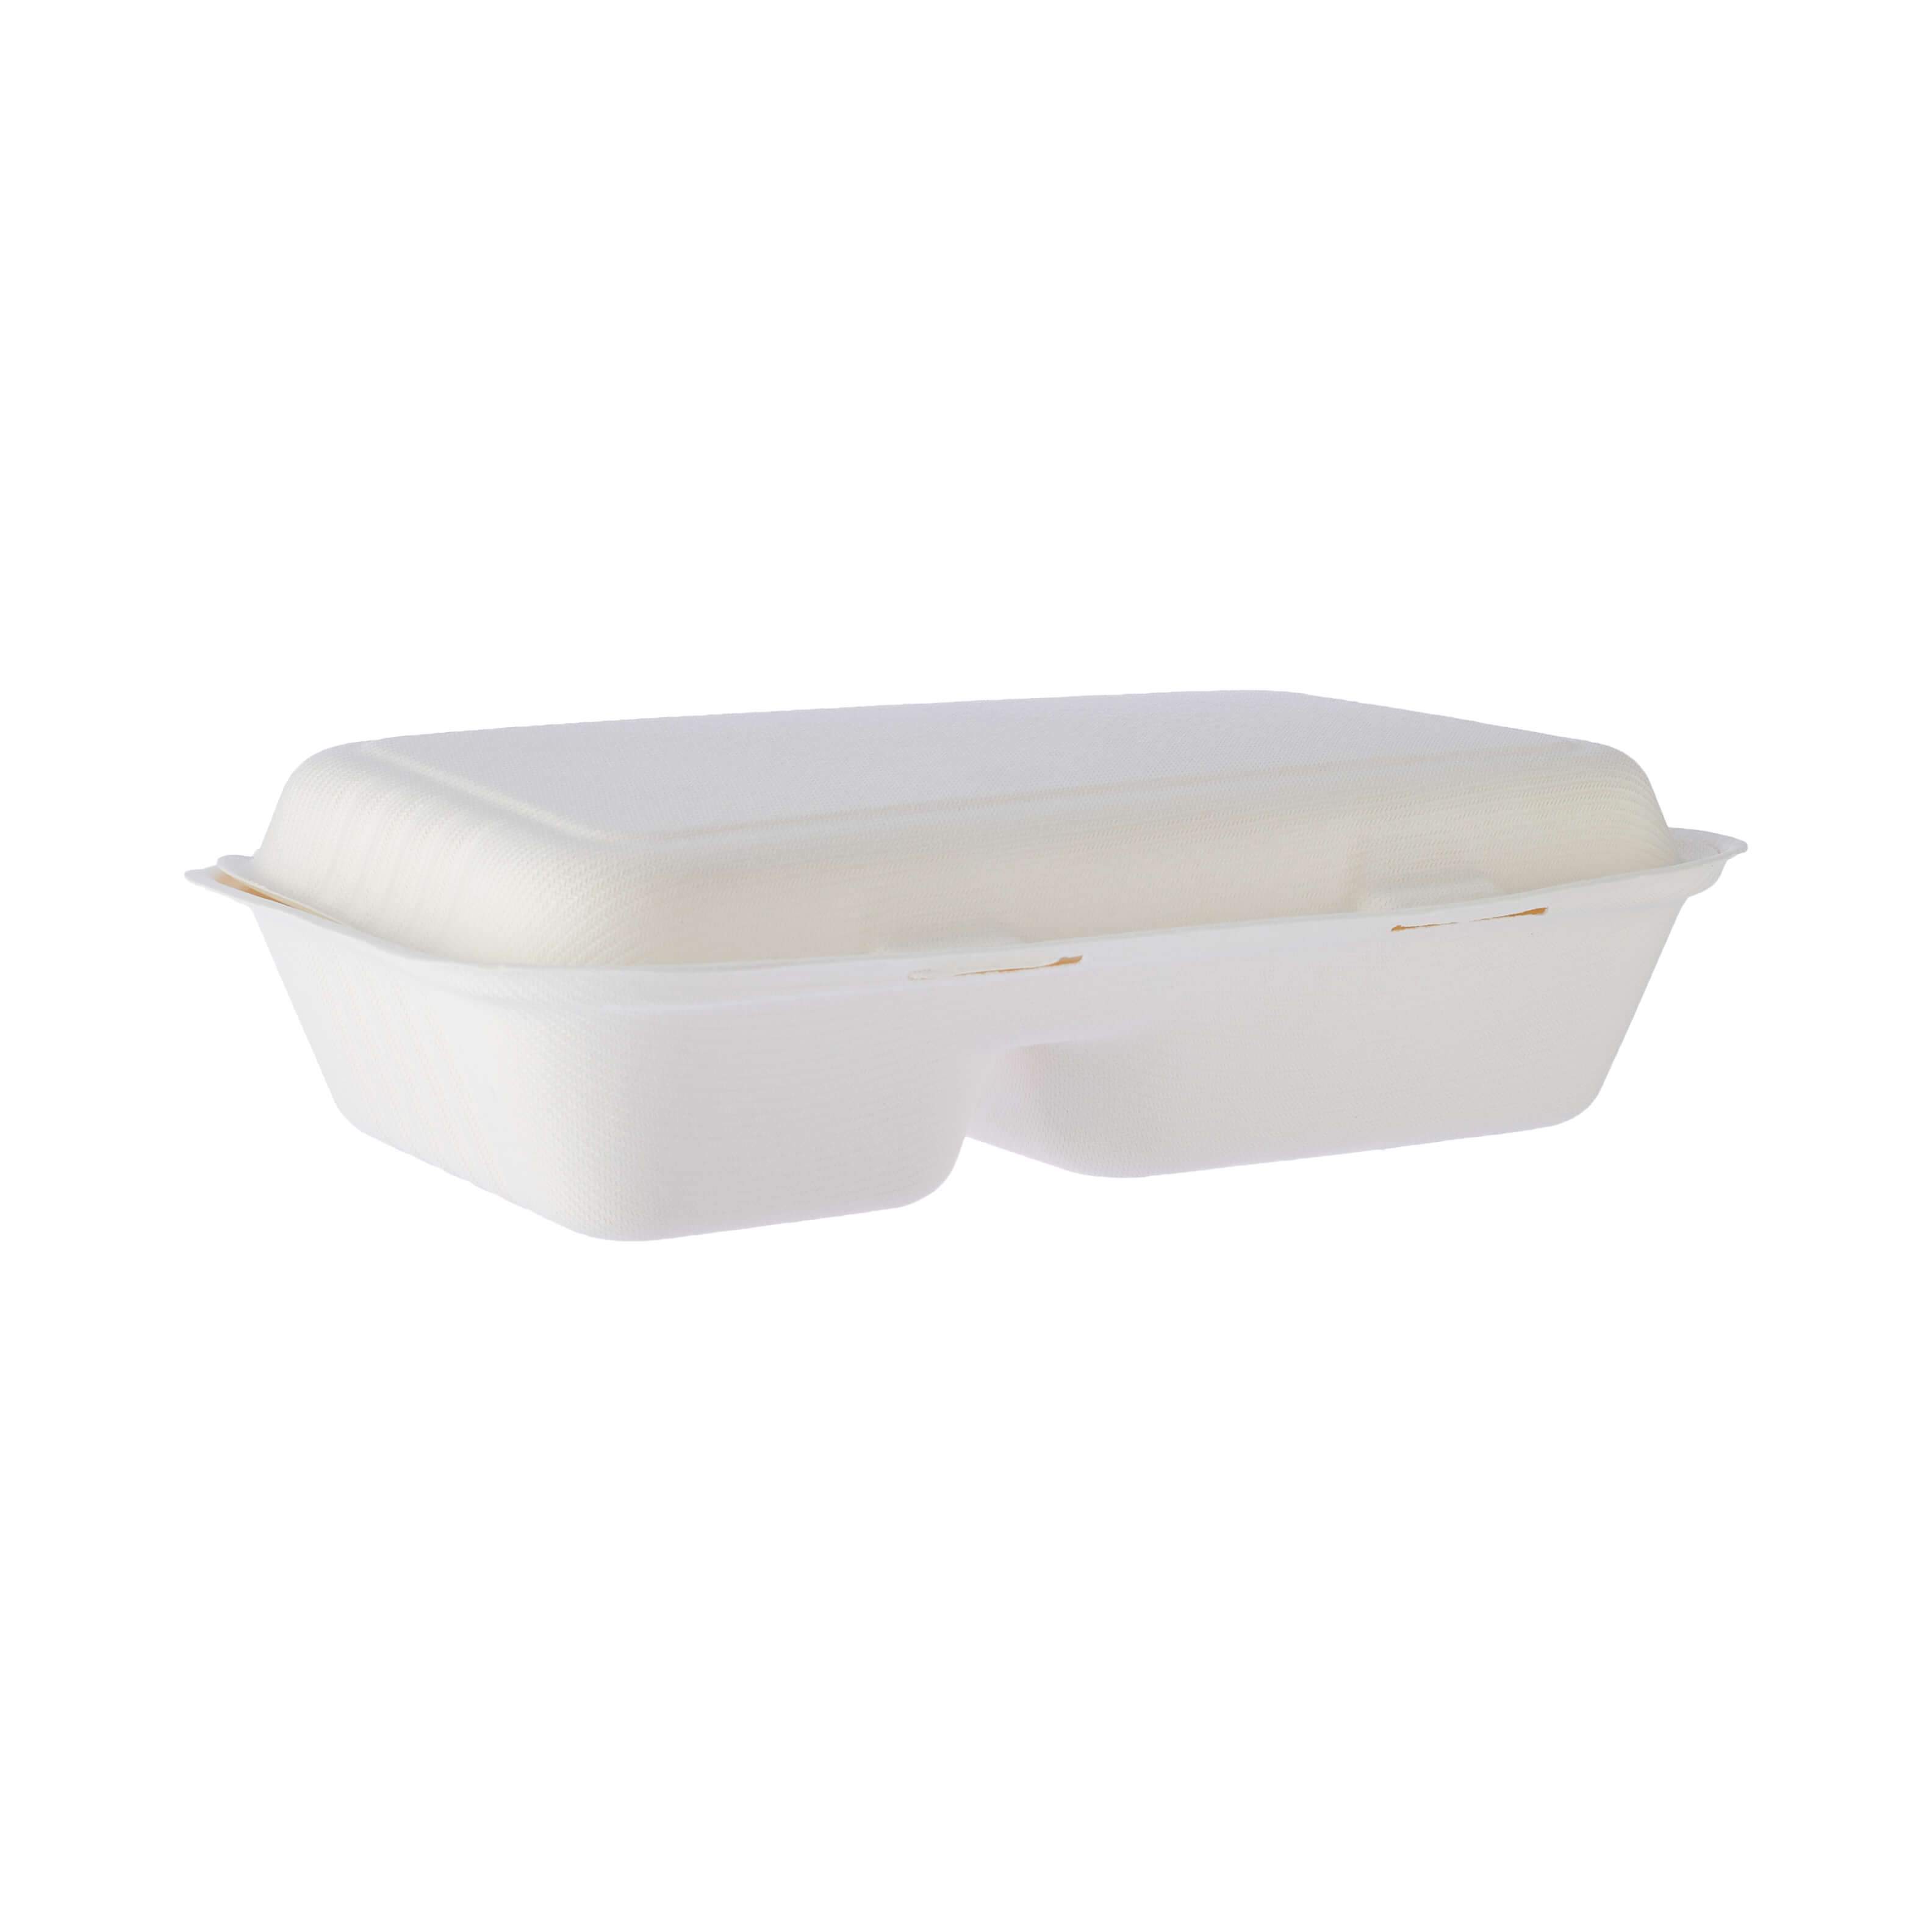 Bio degradable Lunch box in 2 compartment - 500 Pcs - Hotpack Global